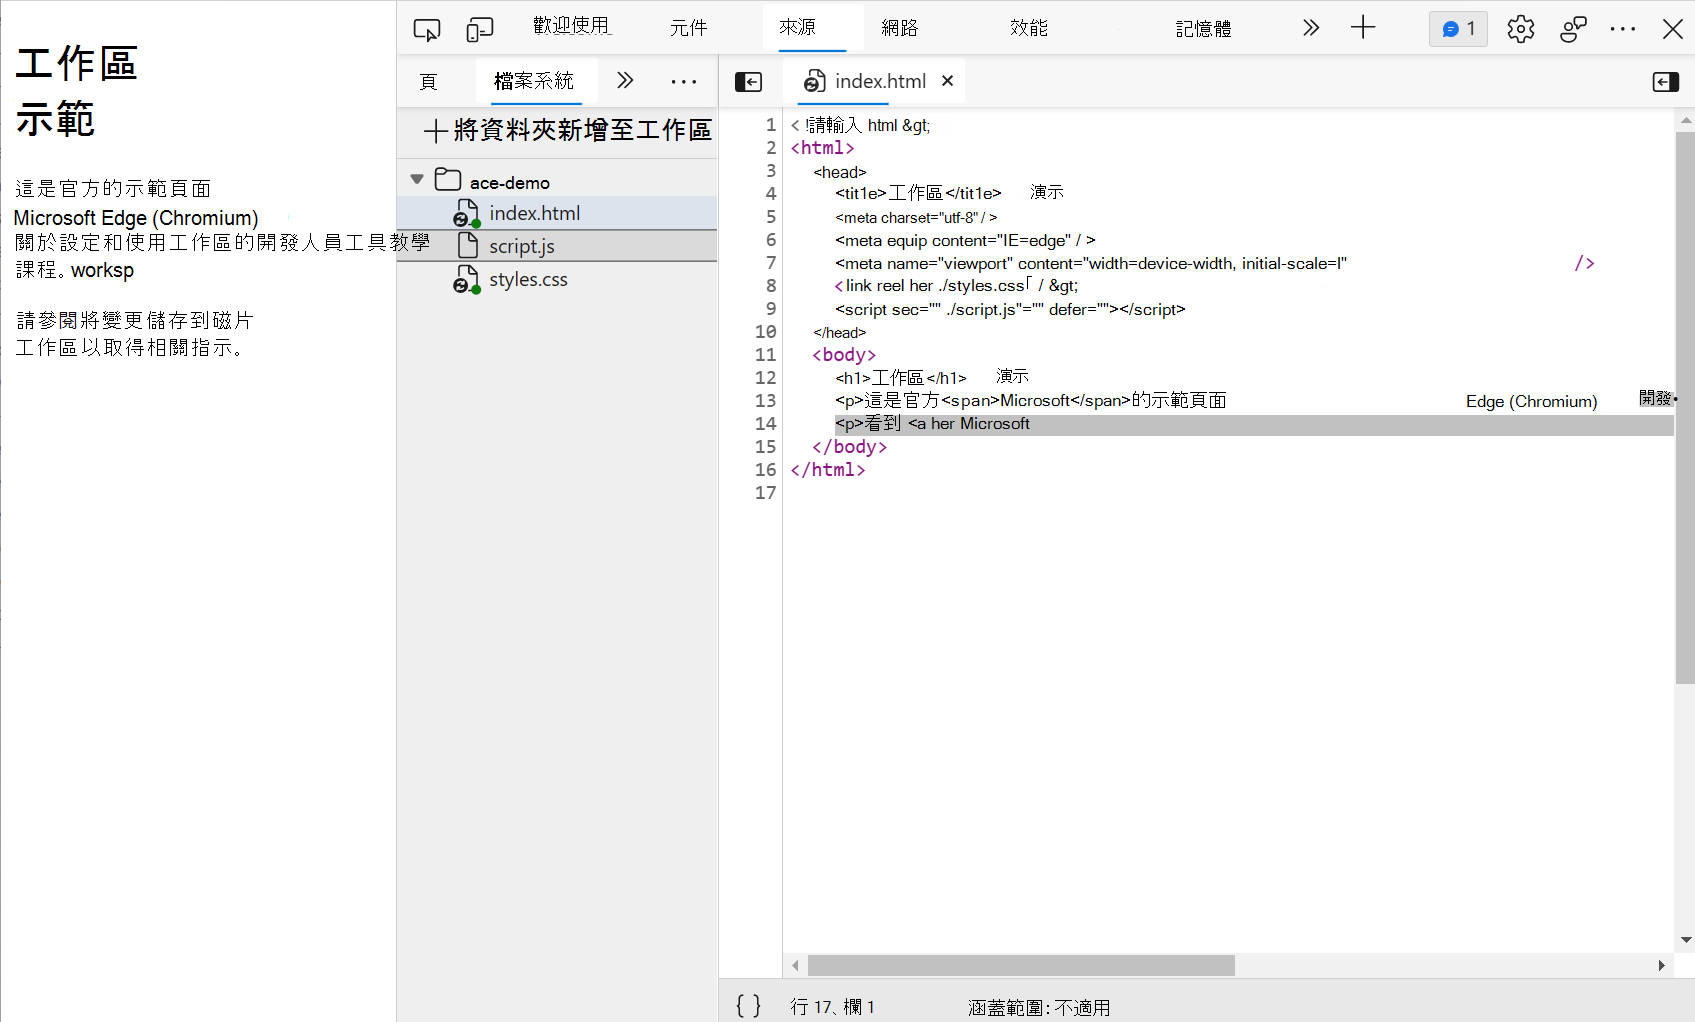 The HTML editor of the Sources tool